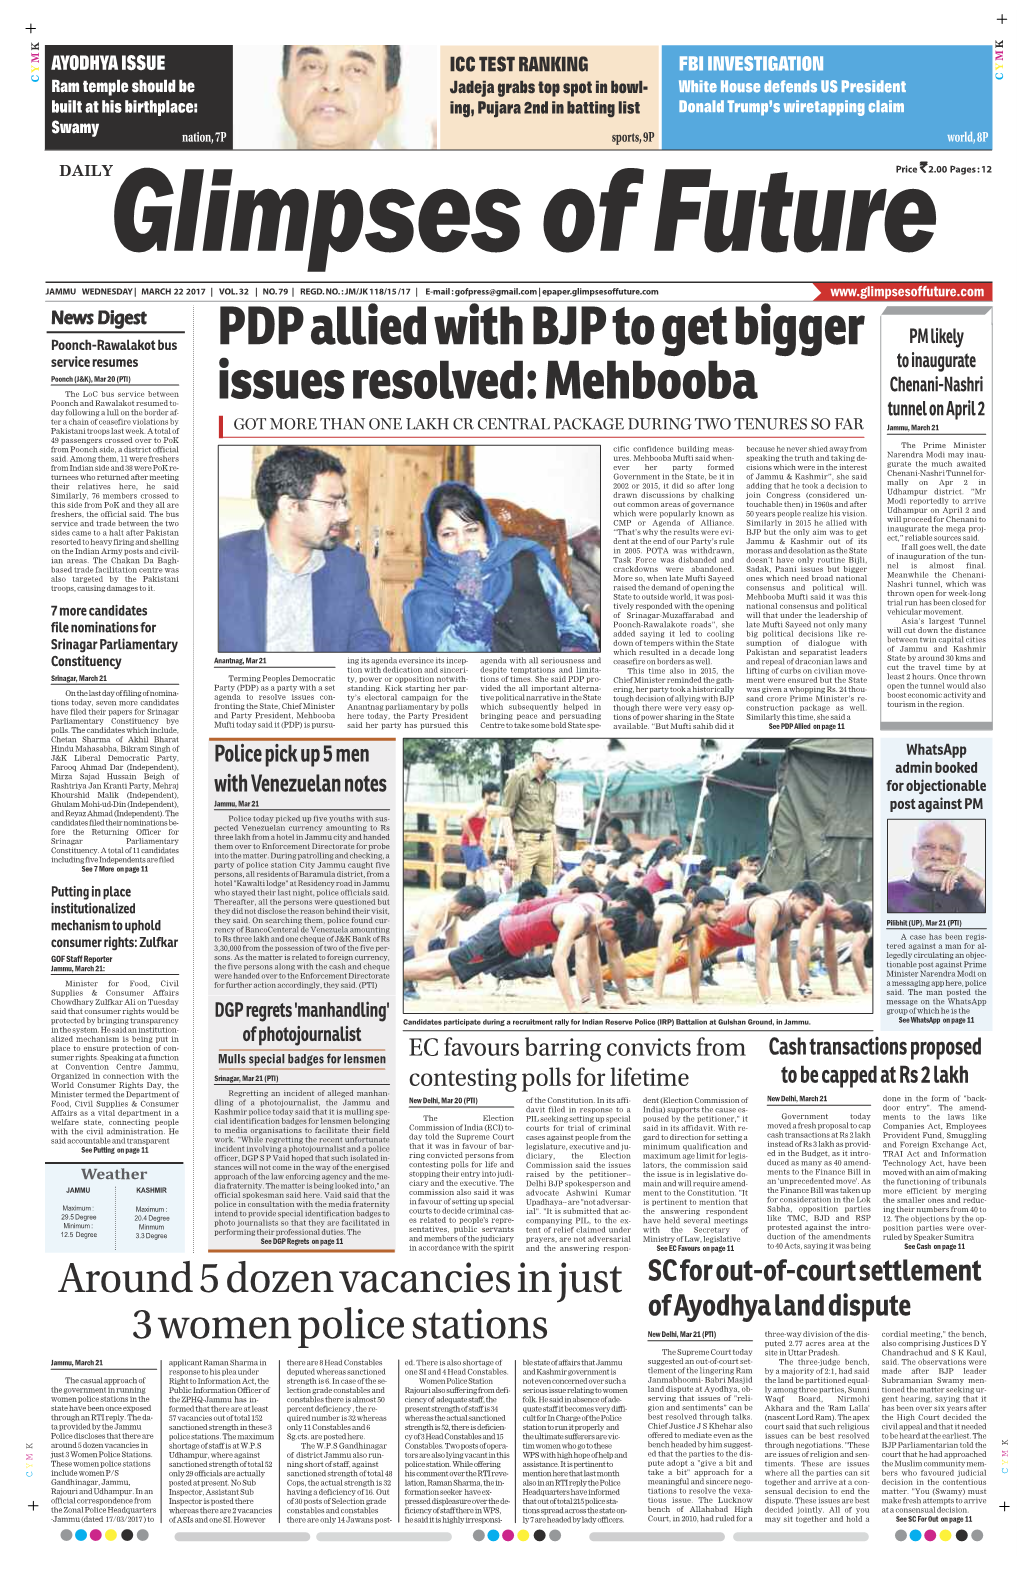 PDP Allied with BJP to Get Bigger Issues Resolved: Mehbooba